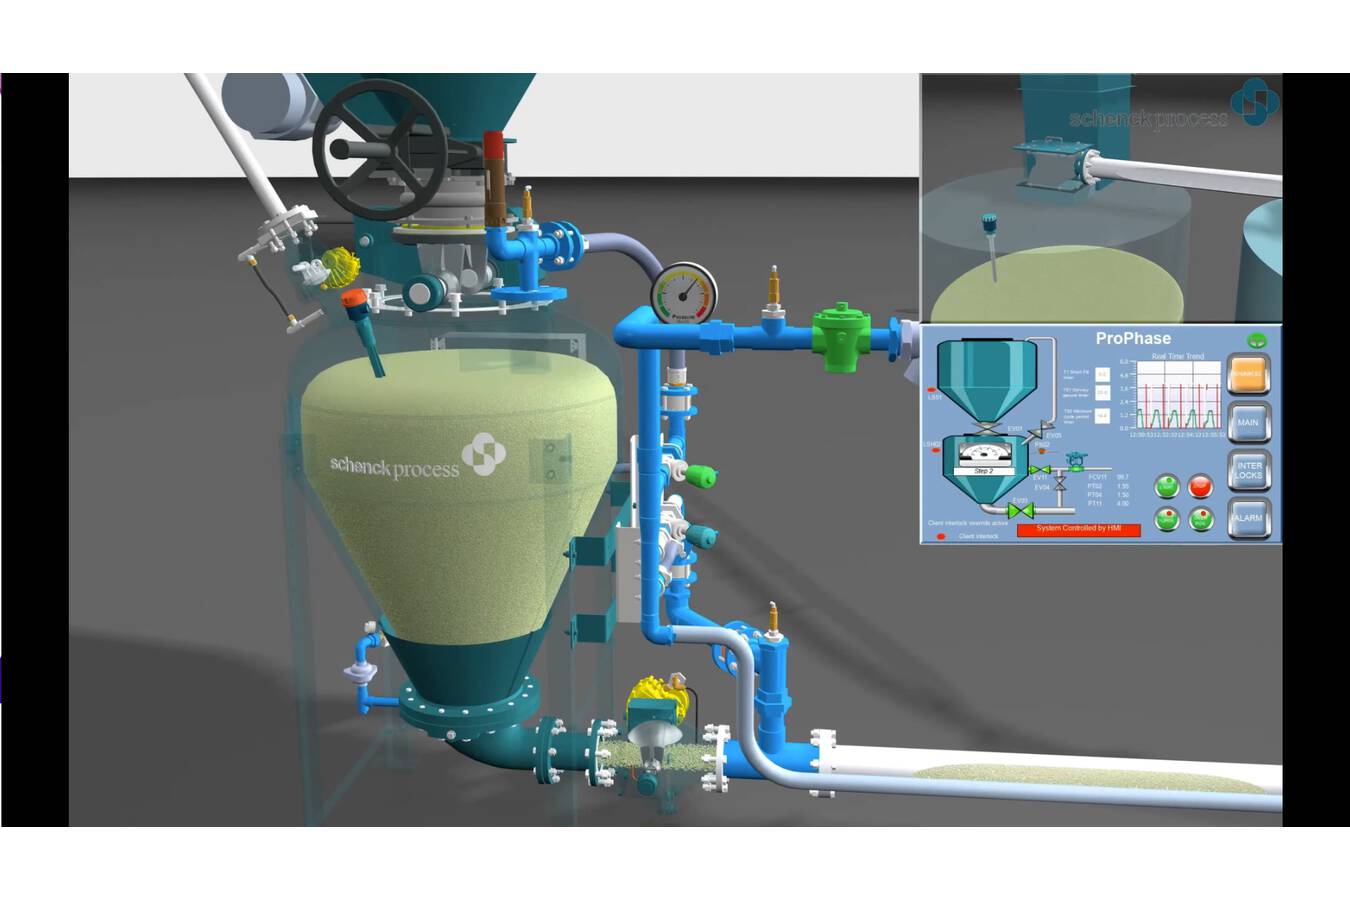 Webinar: Digital Twinning in Pneumatic Conveying Free webinar: Leveraging virtual models with a digital representation of a physical object or system to improve performance and efficiency.